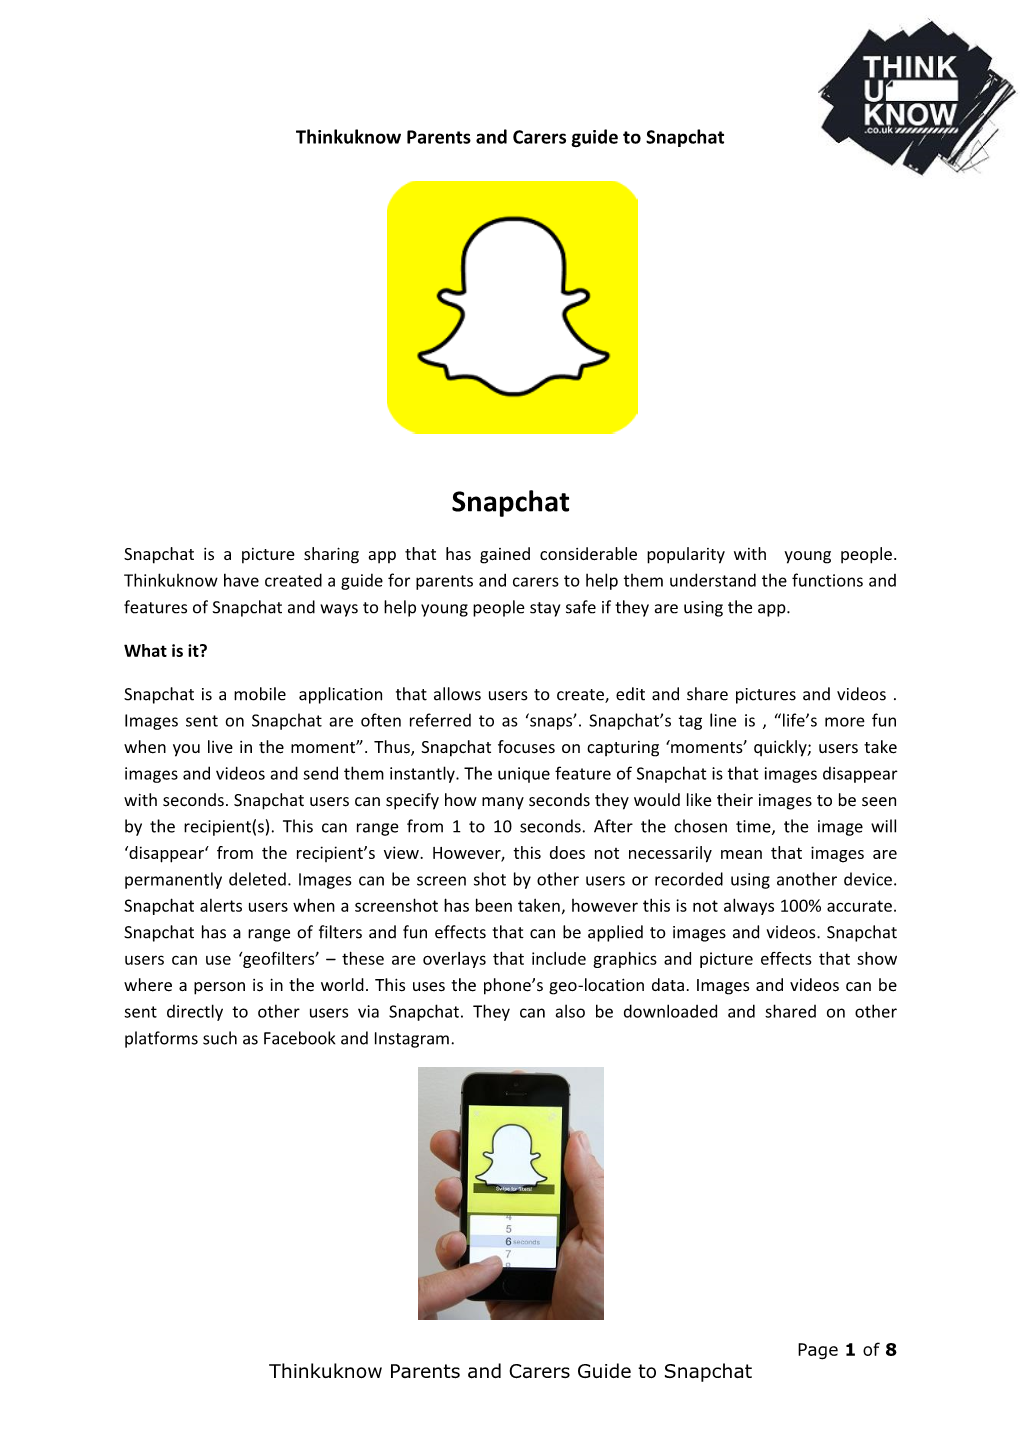 Thinkuknow Parents Guide to Snapchat